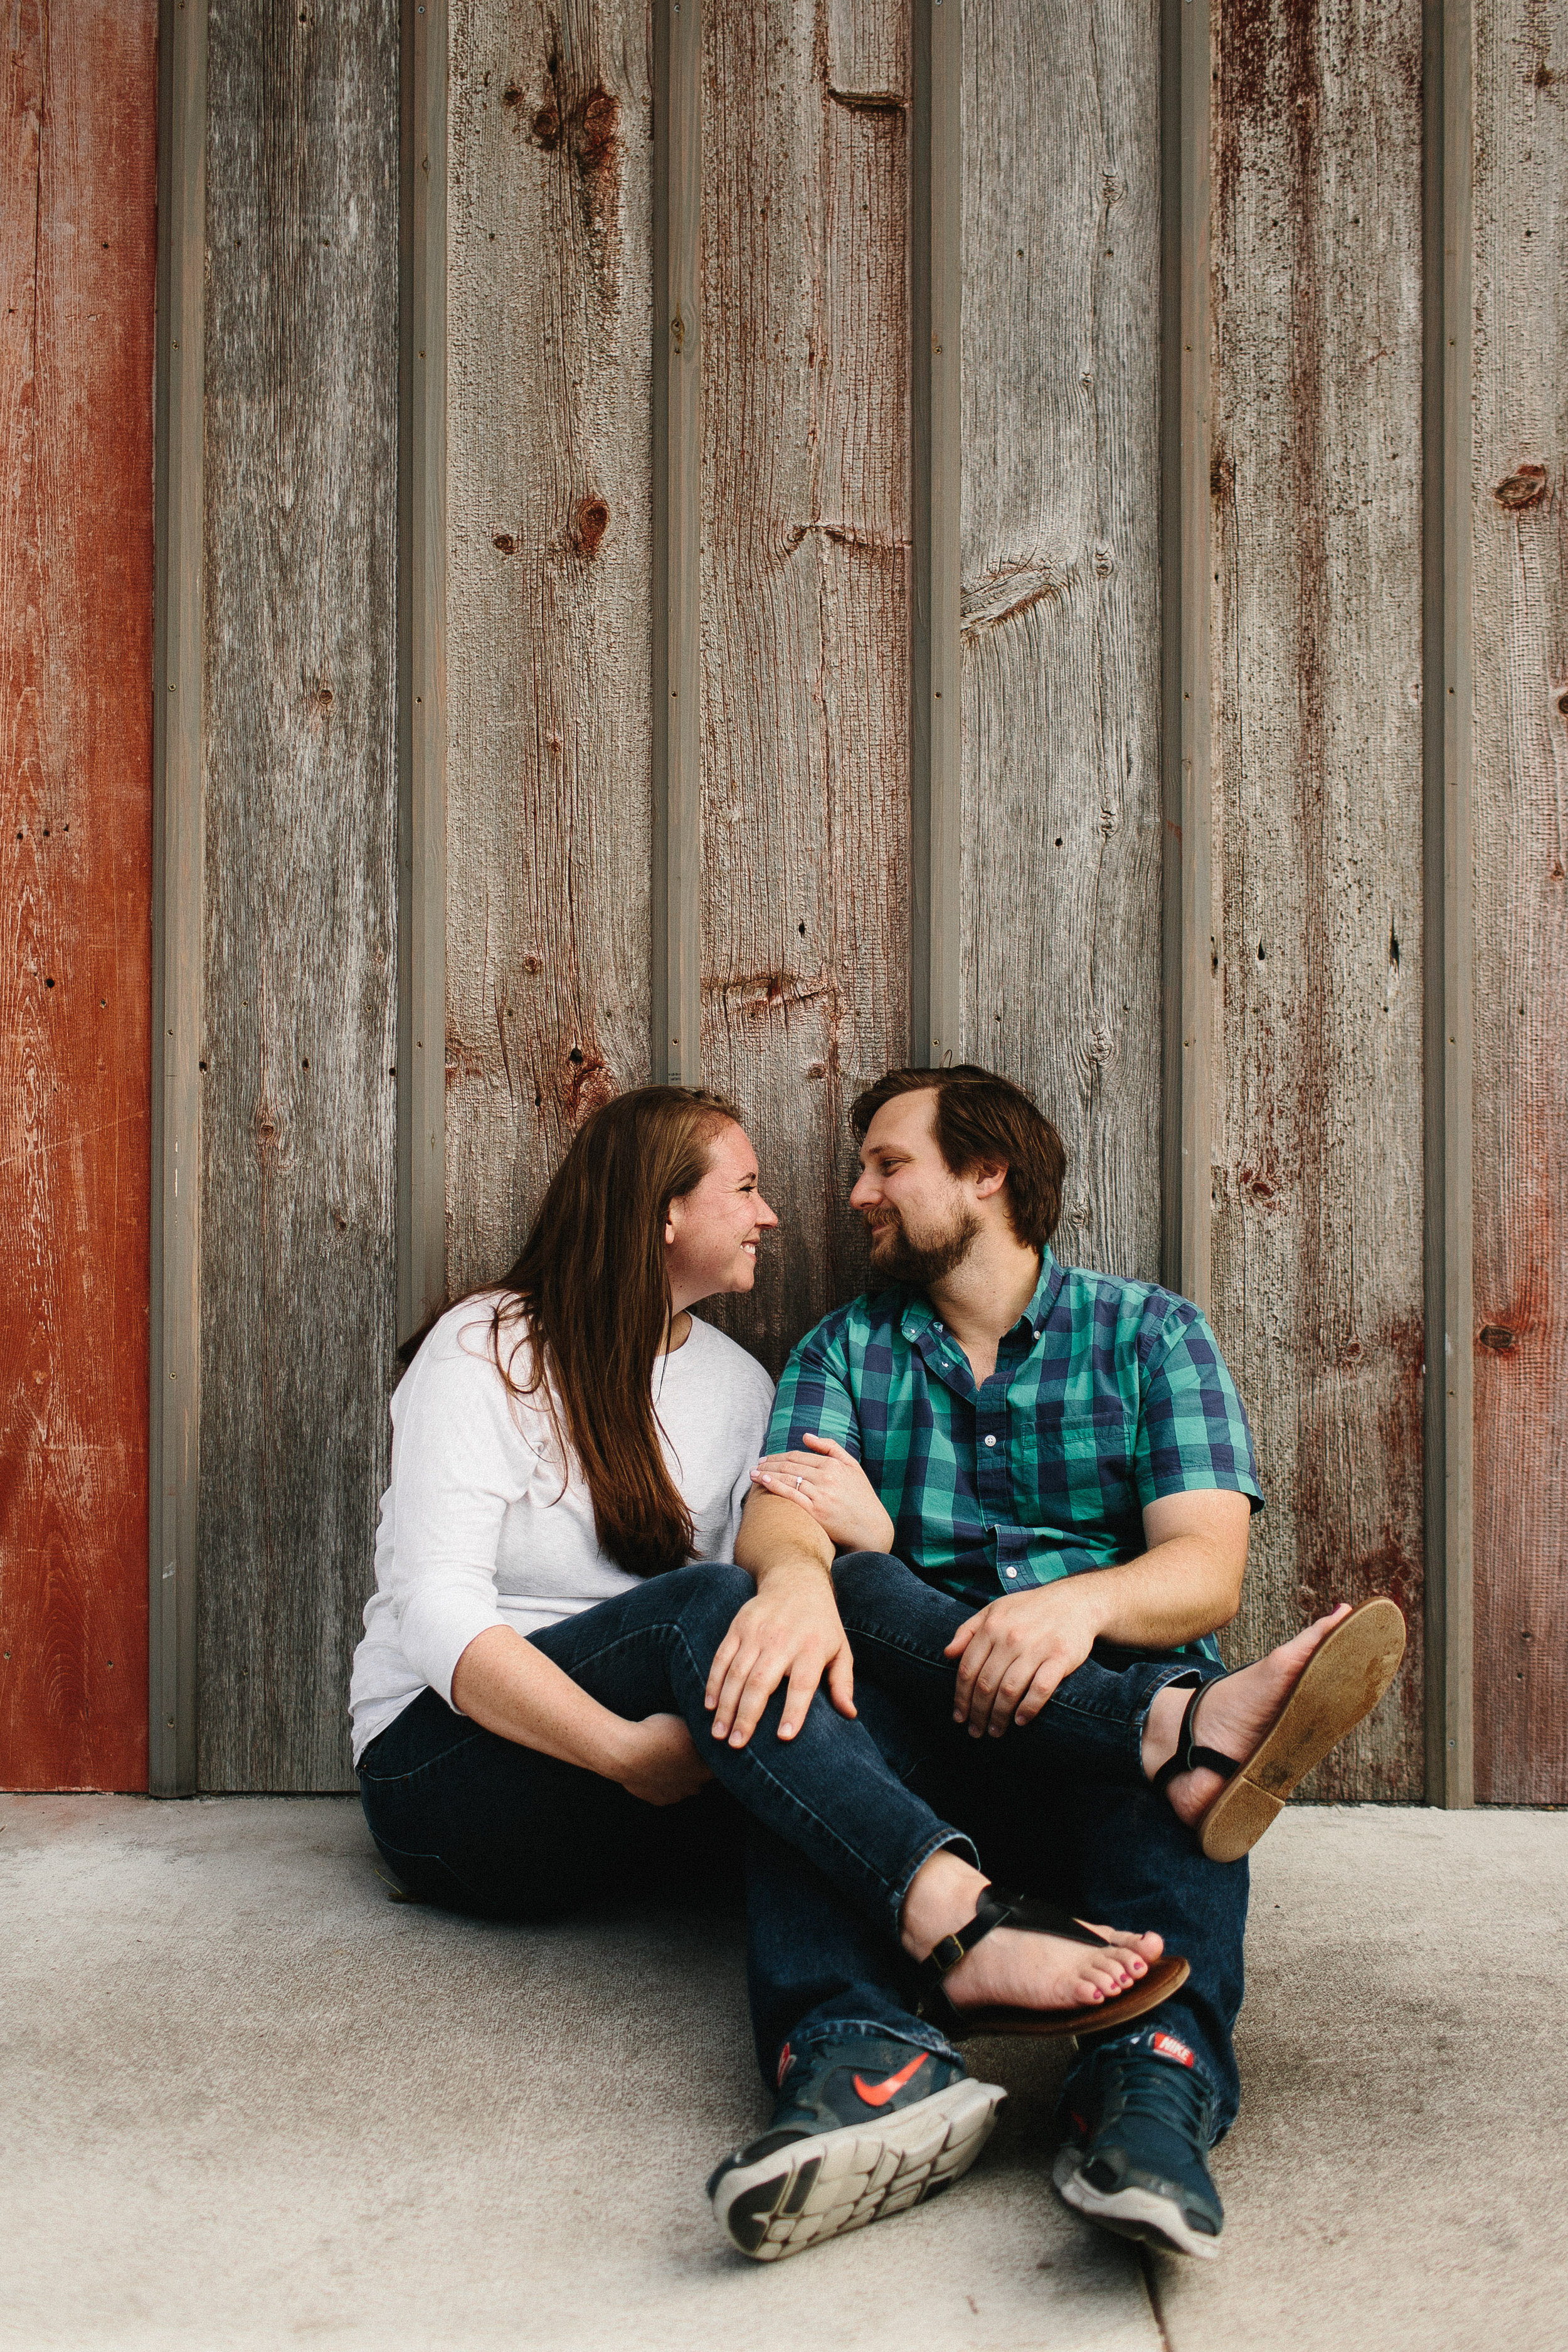 iowa_city_engagement_adventure_prairie_graduate_at_home_dog_couples_downtown_wilsons_orchard_1052.jpg